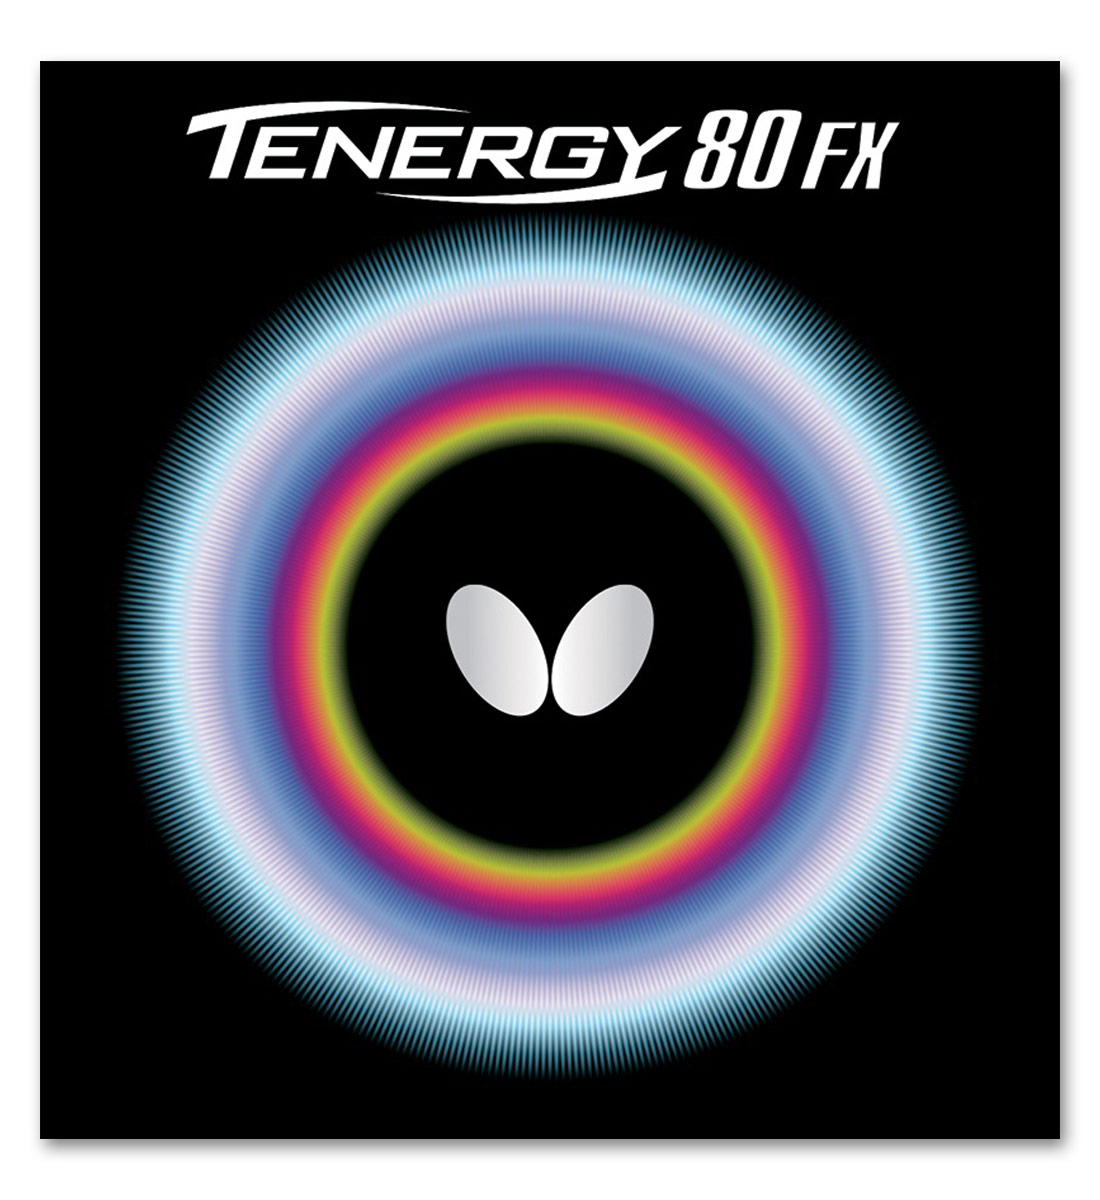 Butterfly Tenergy 80 FX Questions & Answers